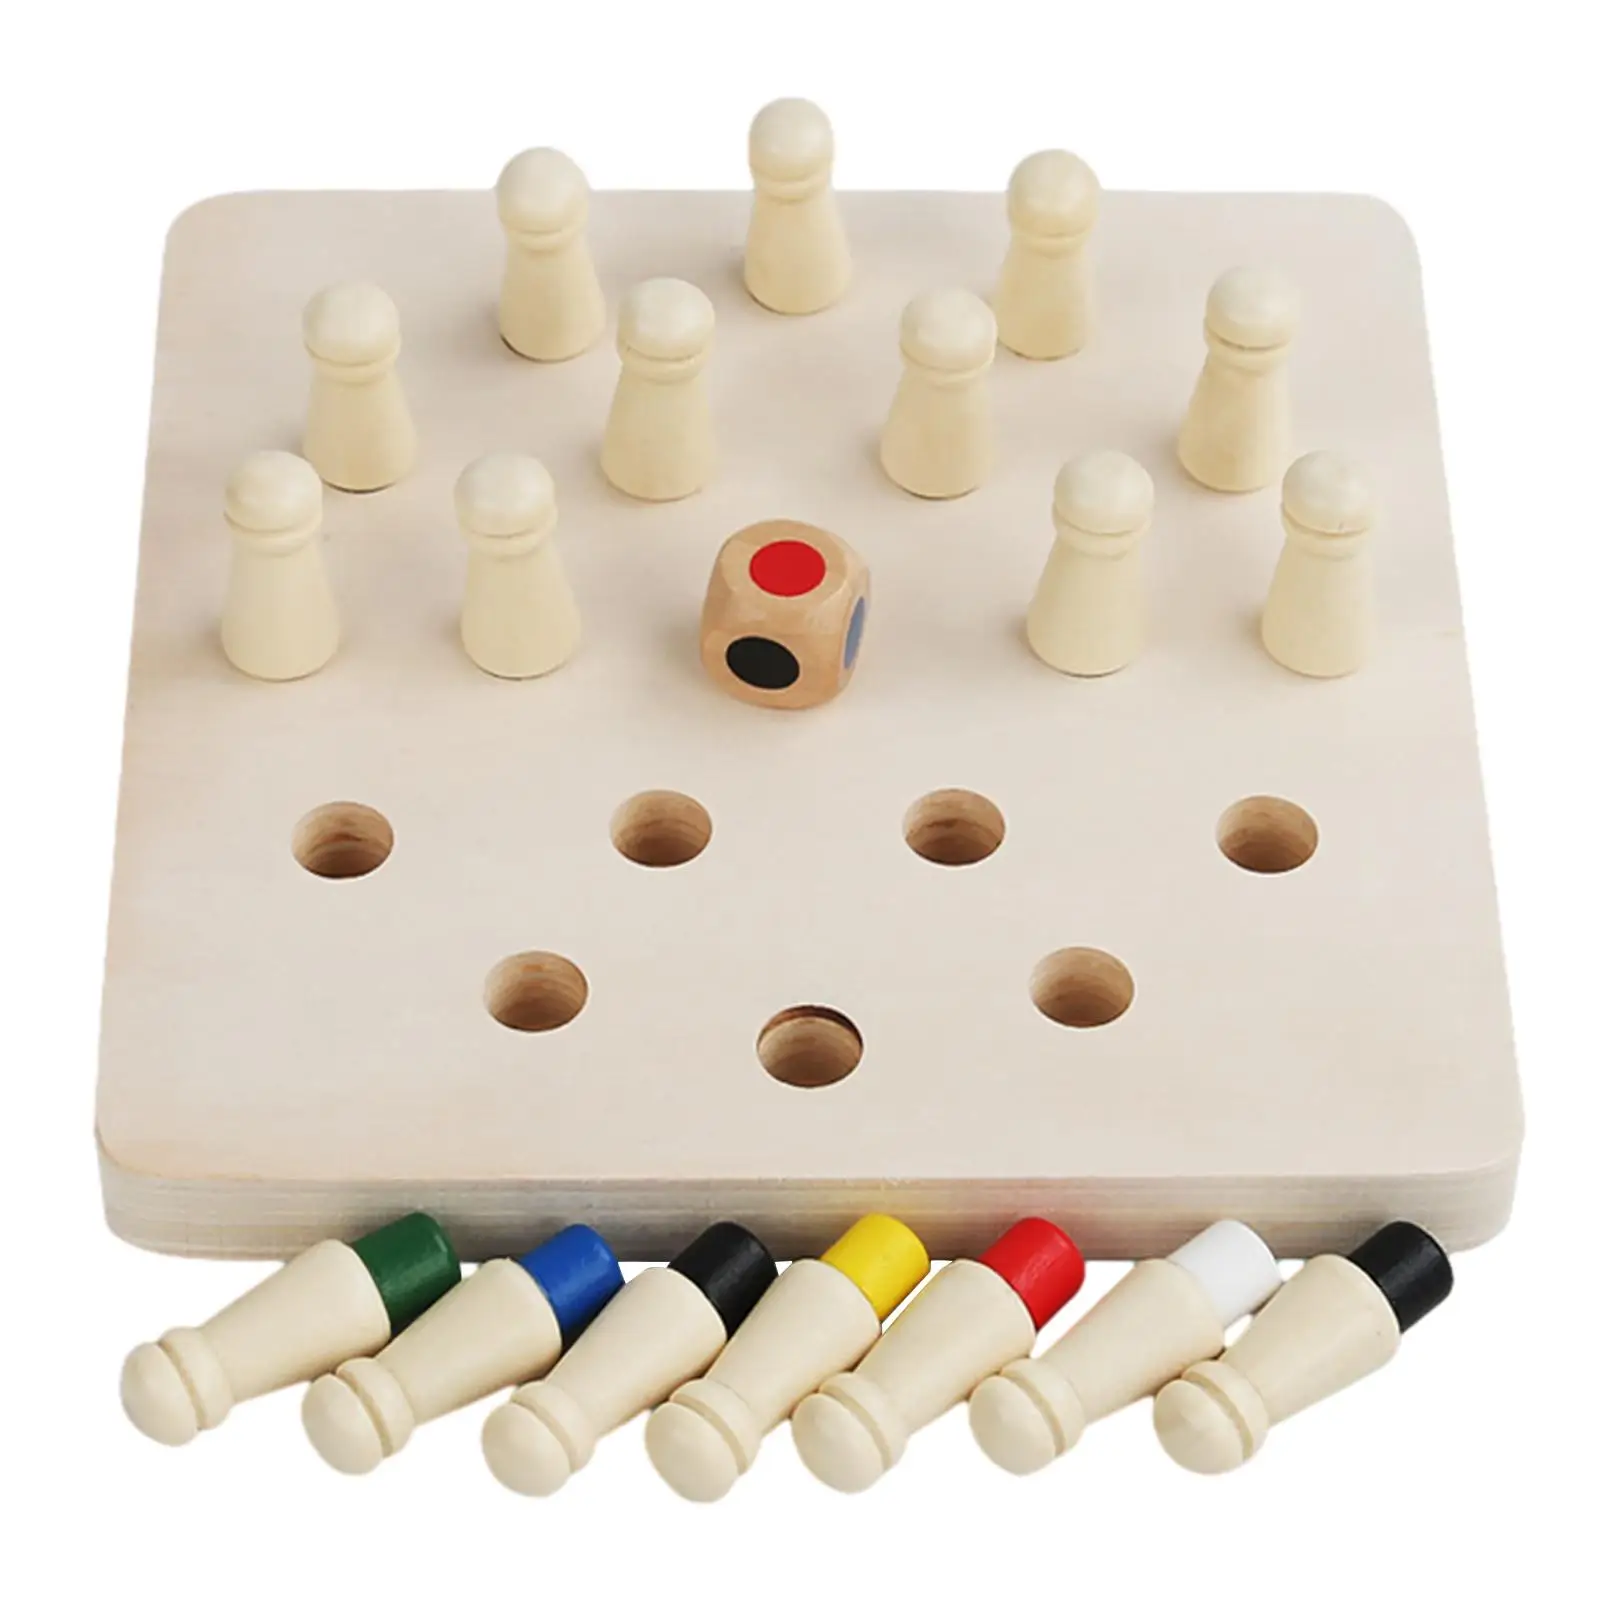 Learning Activities Educational Toys Educational Board Game Memory Chess Toys for Kids Adults Toddlers Boys Children